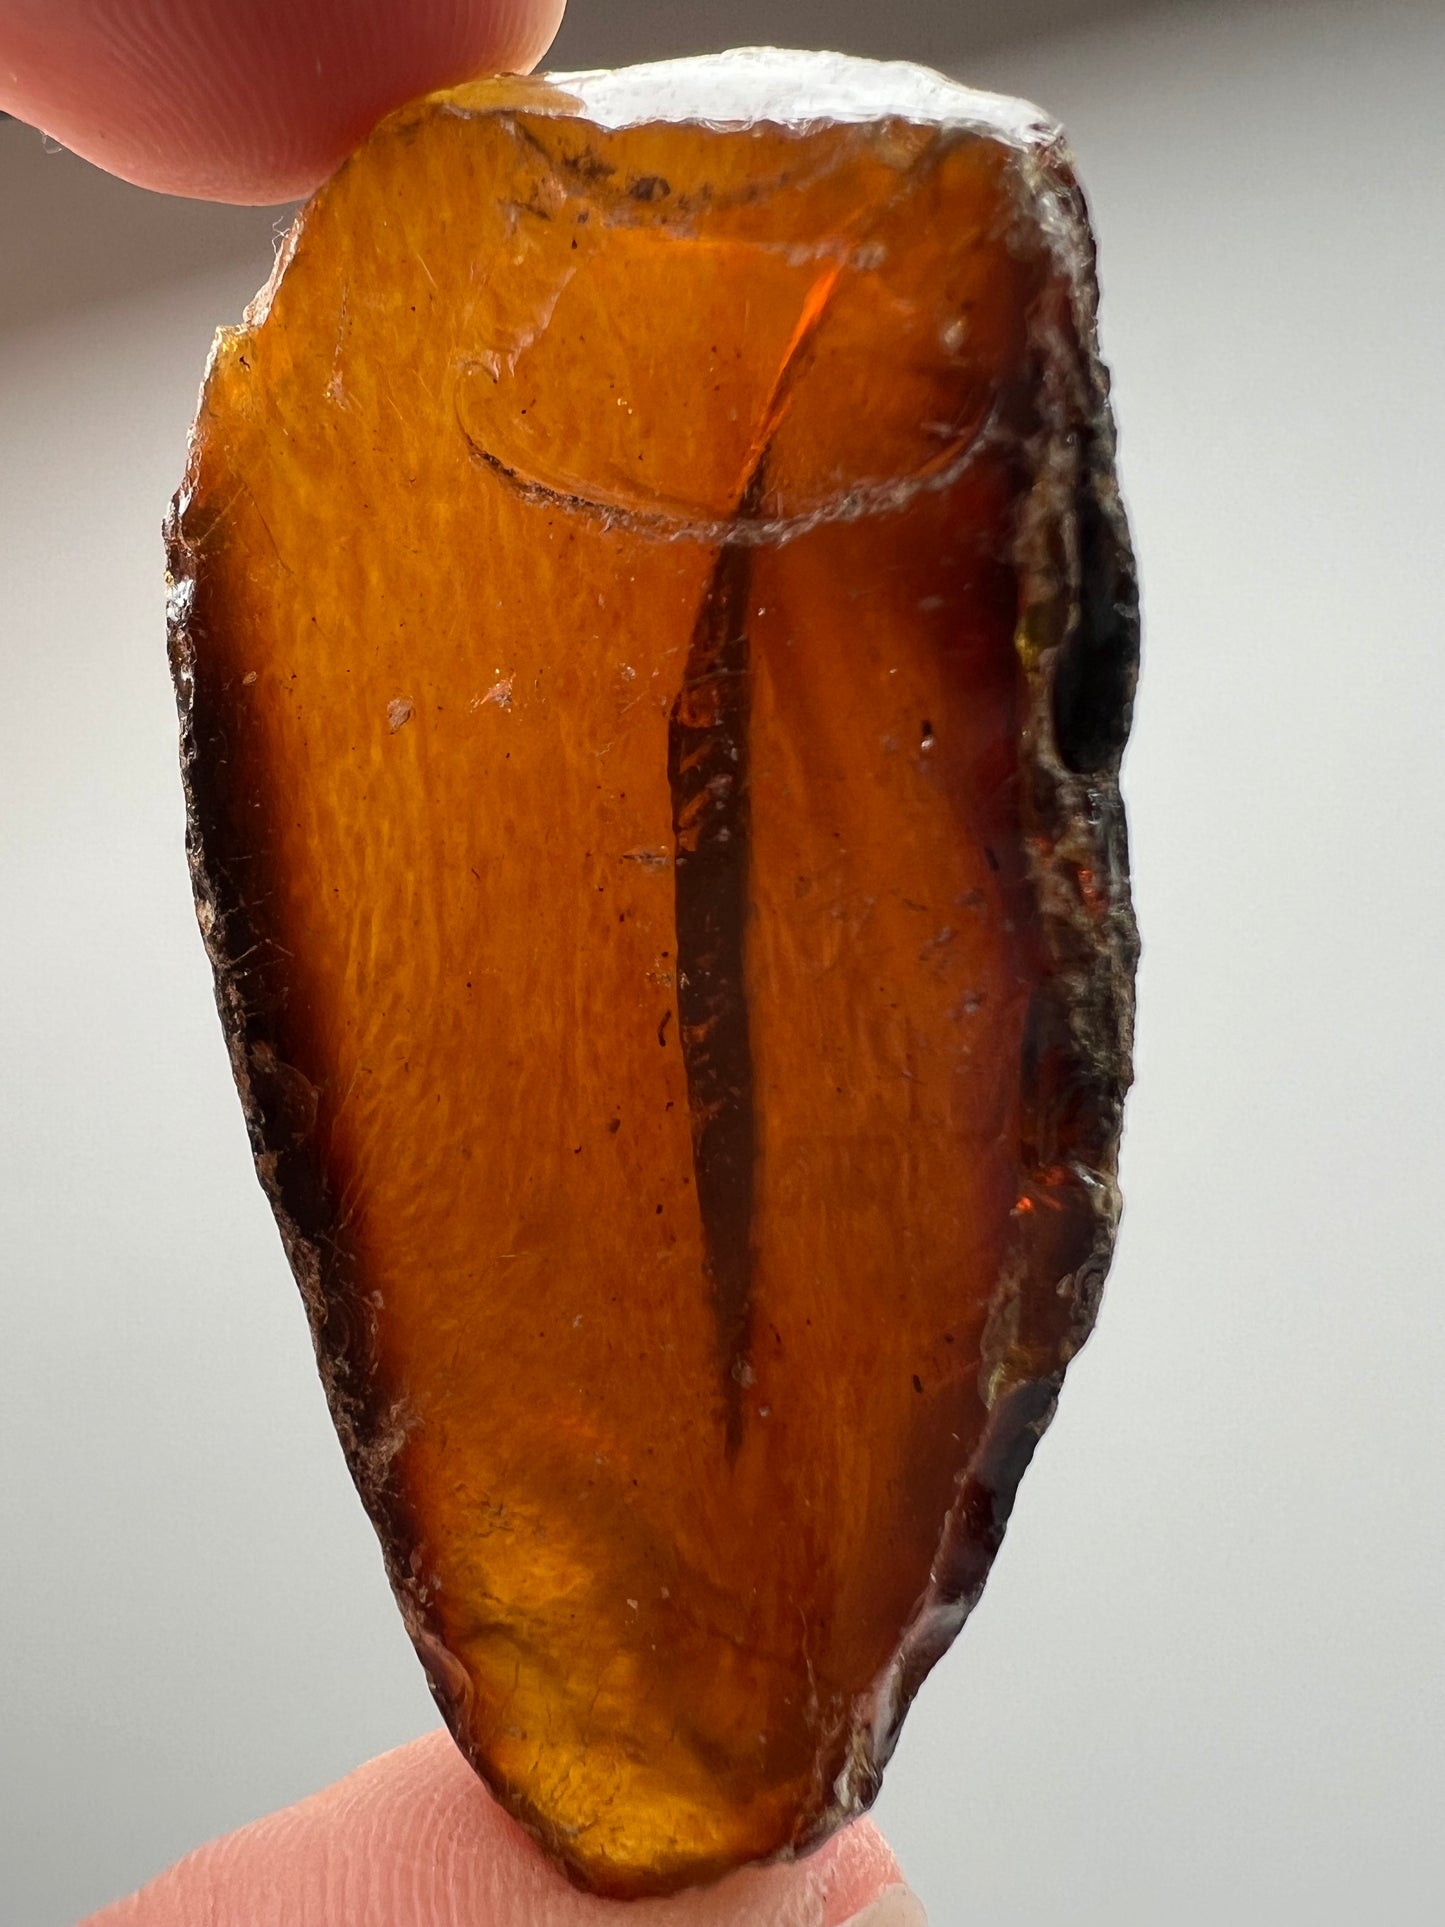 Amber // Cherry // Fossilized // Tree Resin